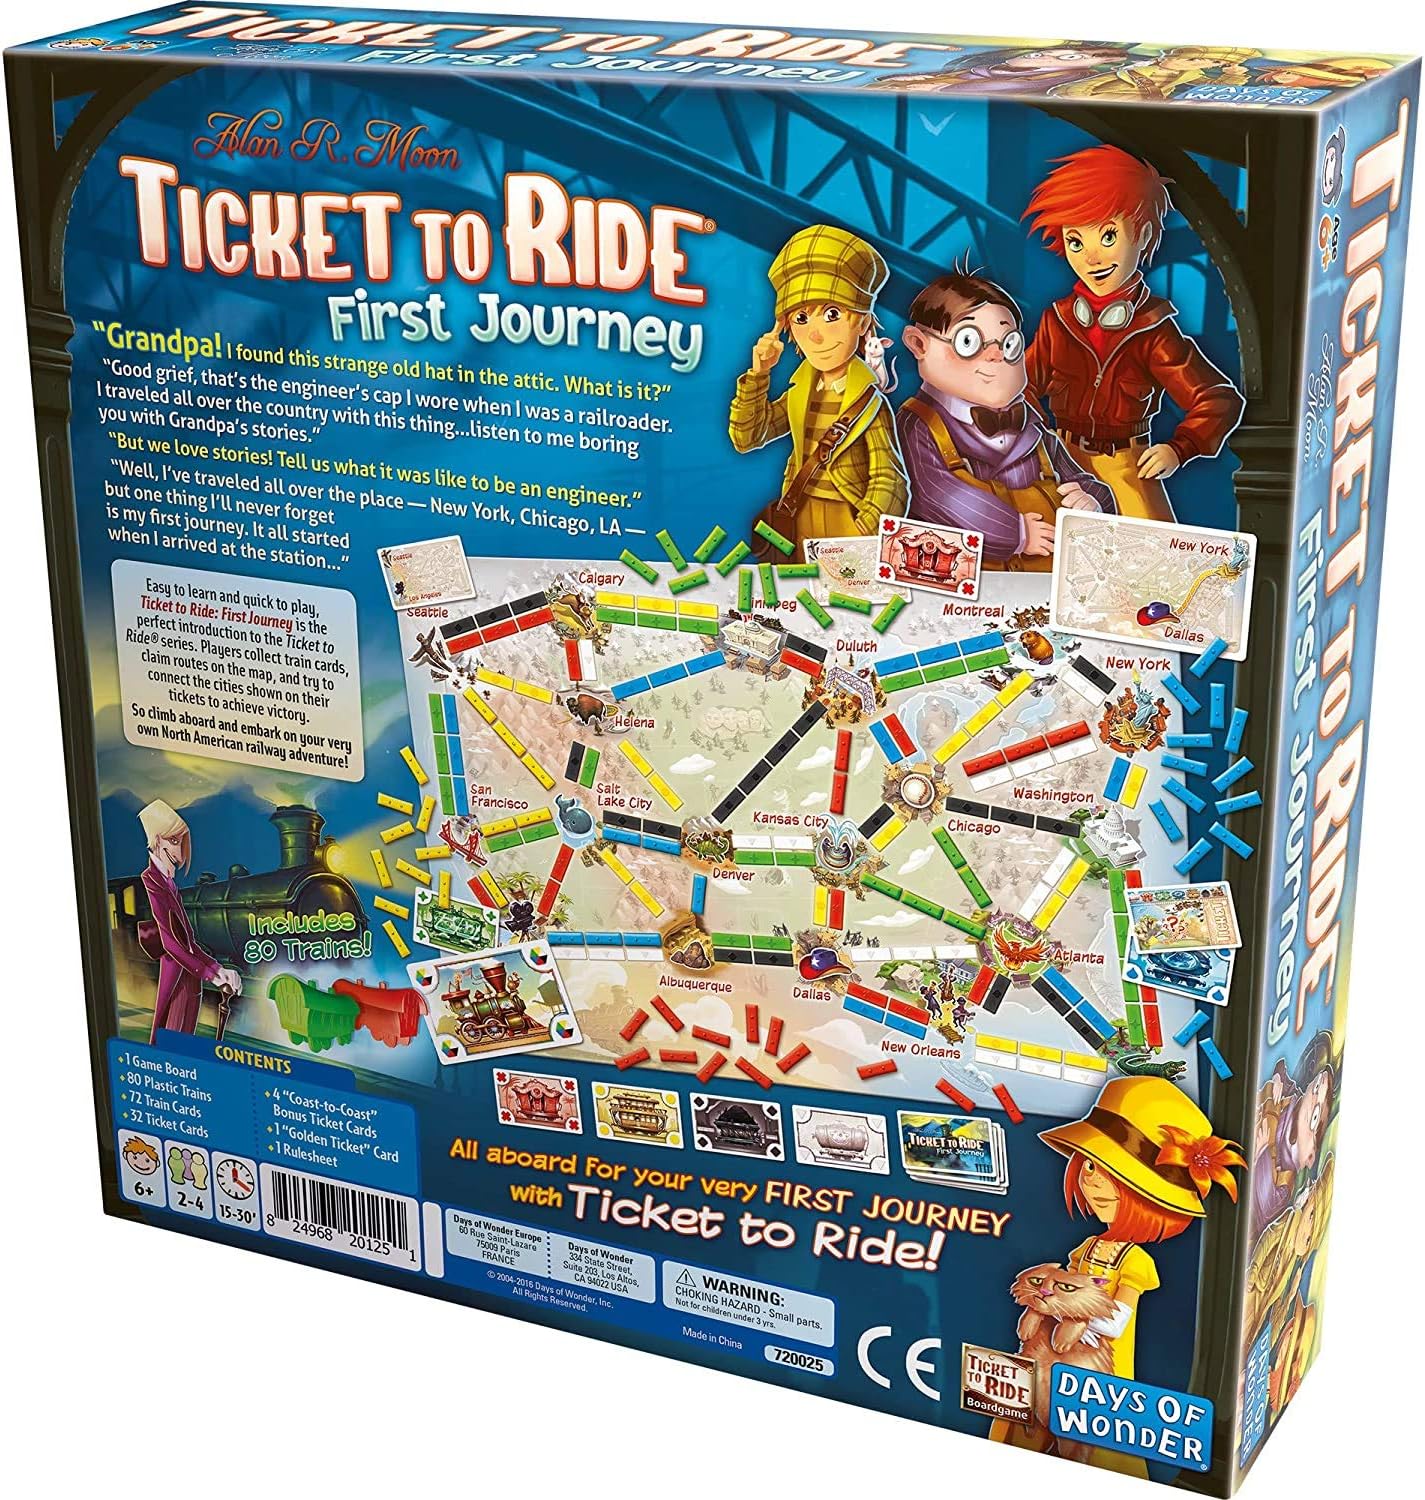 Ticket to Ride First Journey Board Gametabletop game